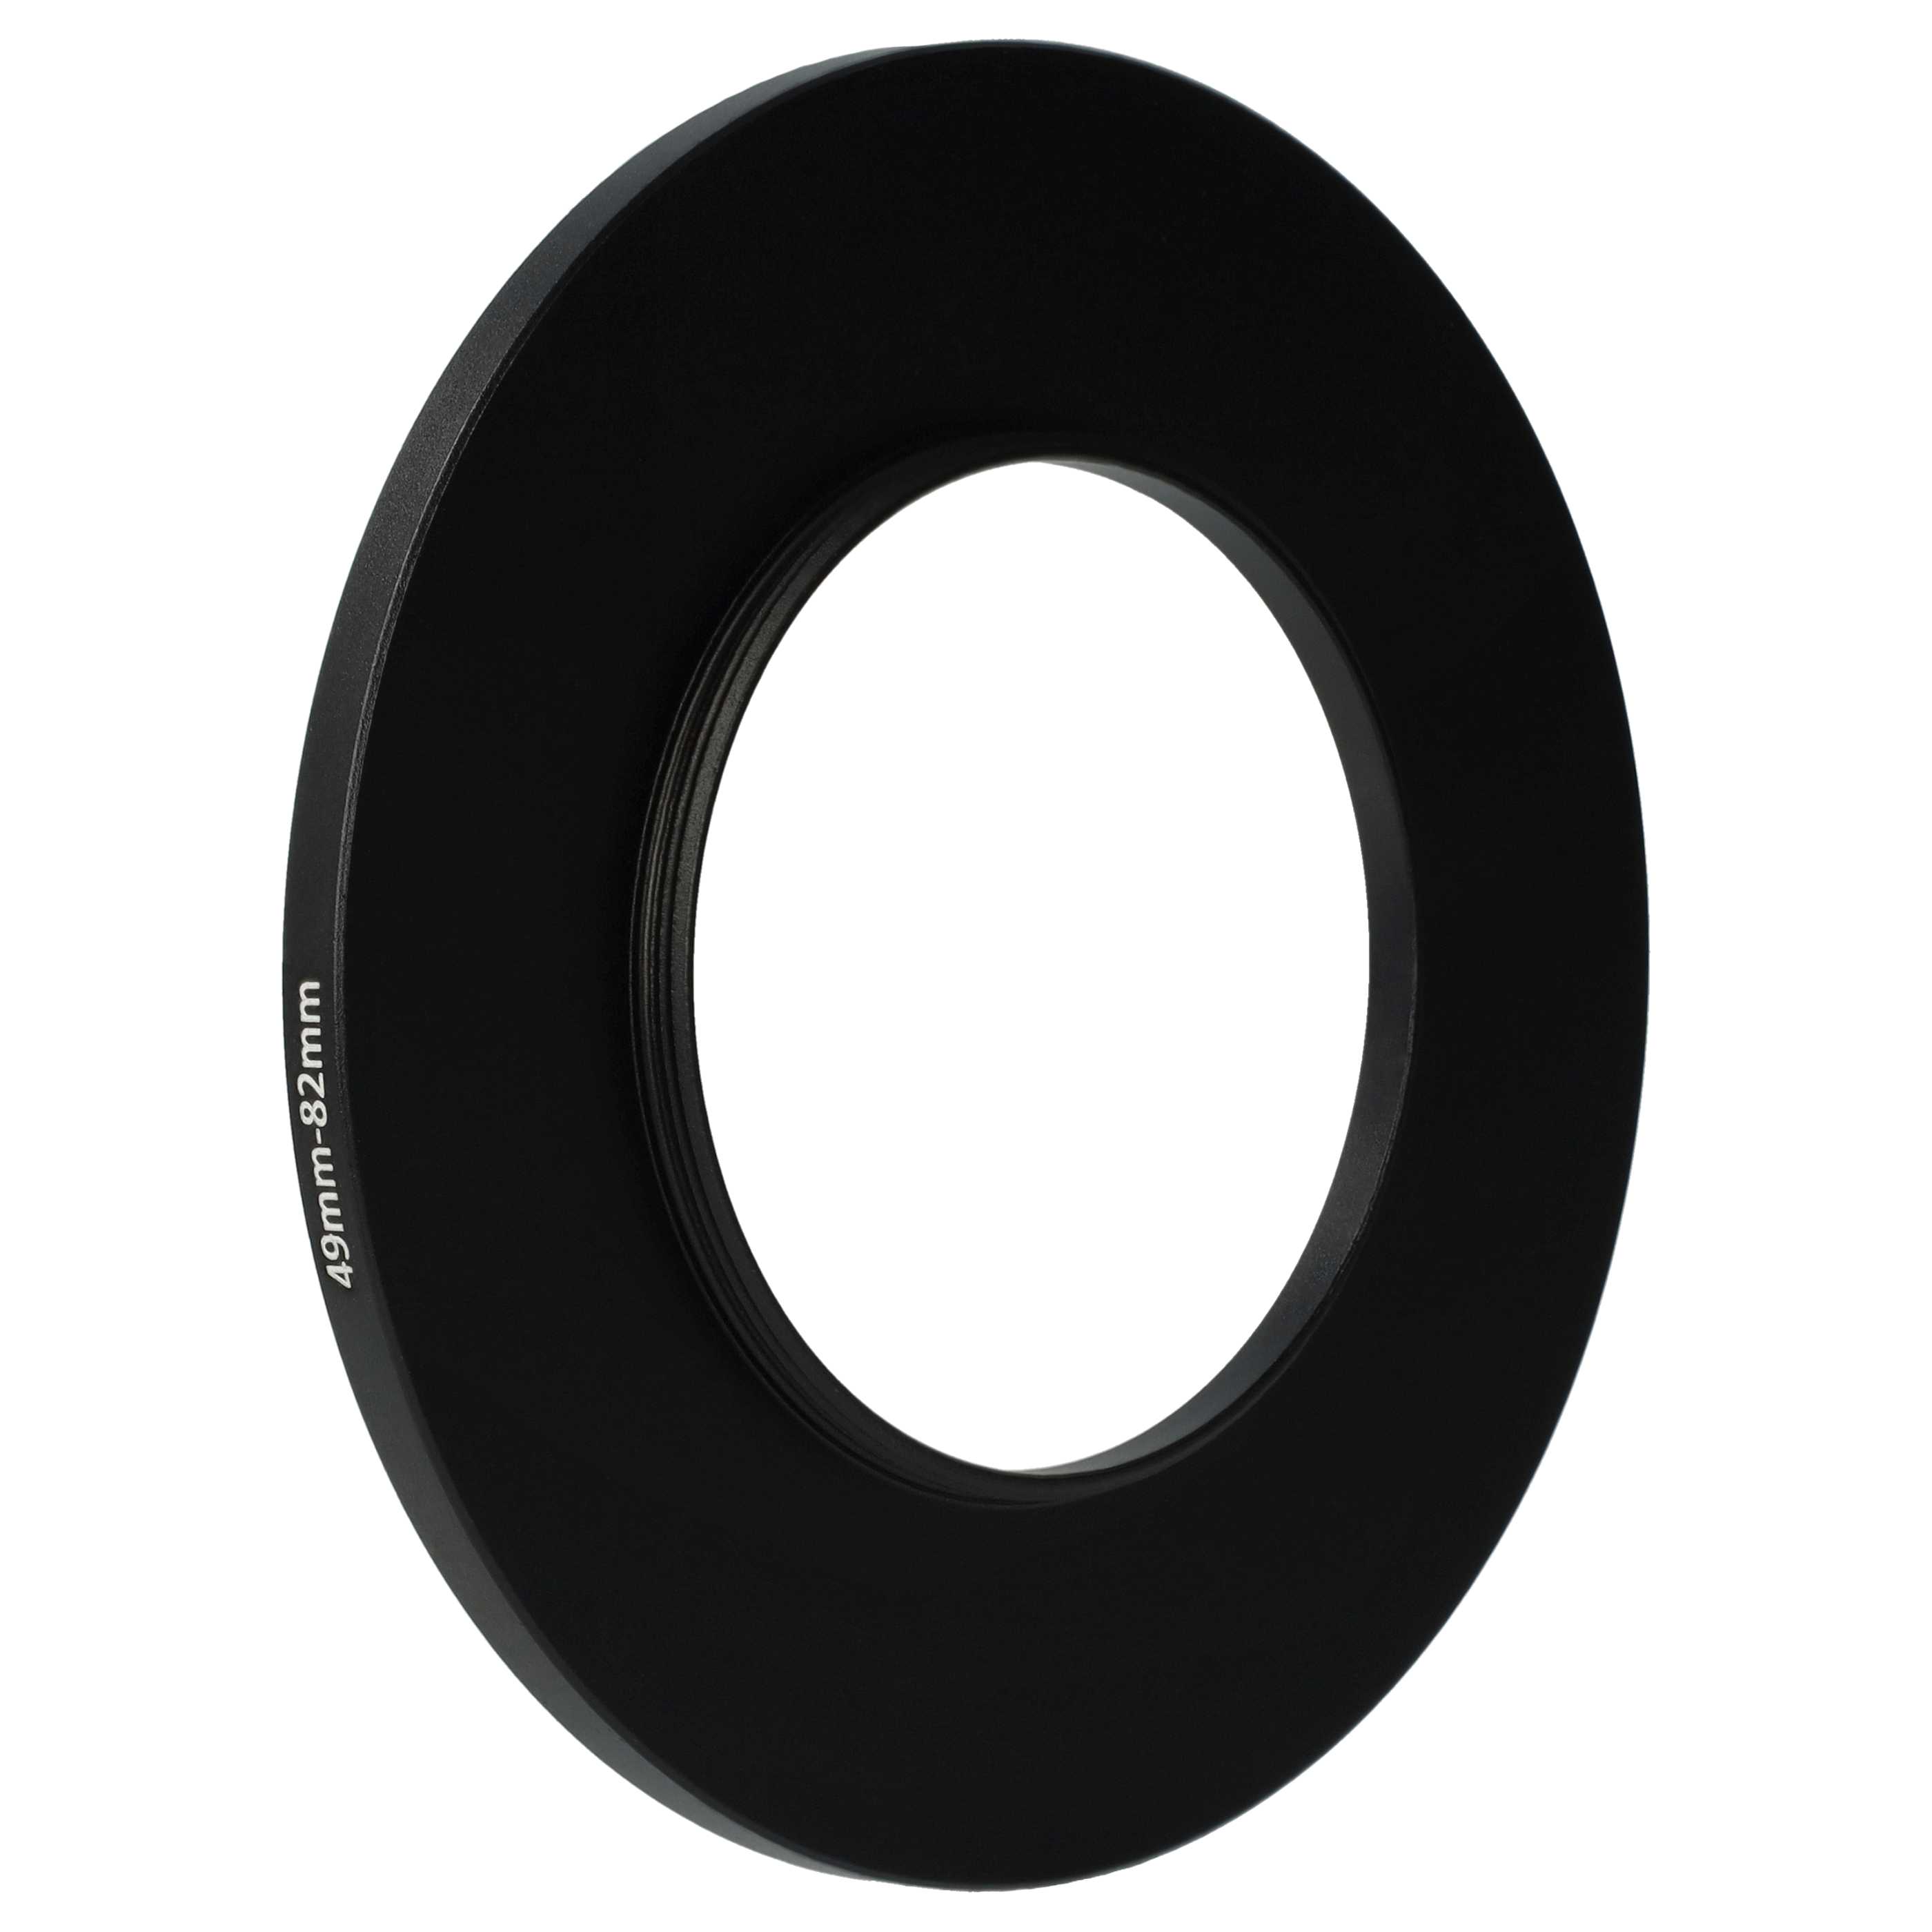 Step-Up Ring Adapter of 49 mm to 82 mmfor various Camera Lens - Filter Adapter